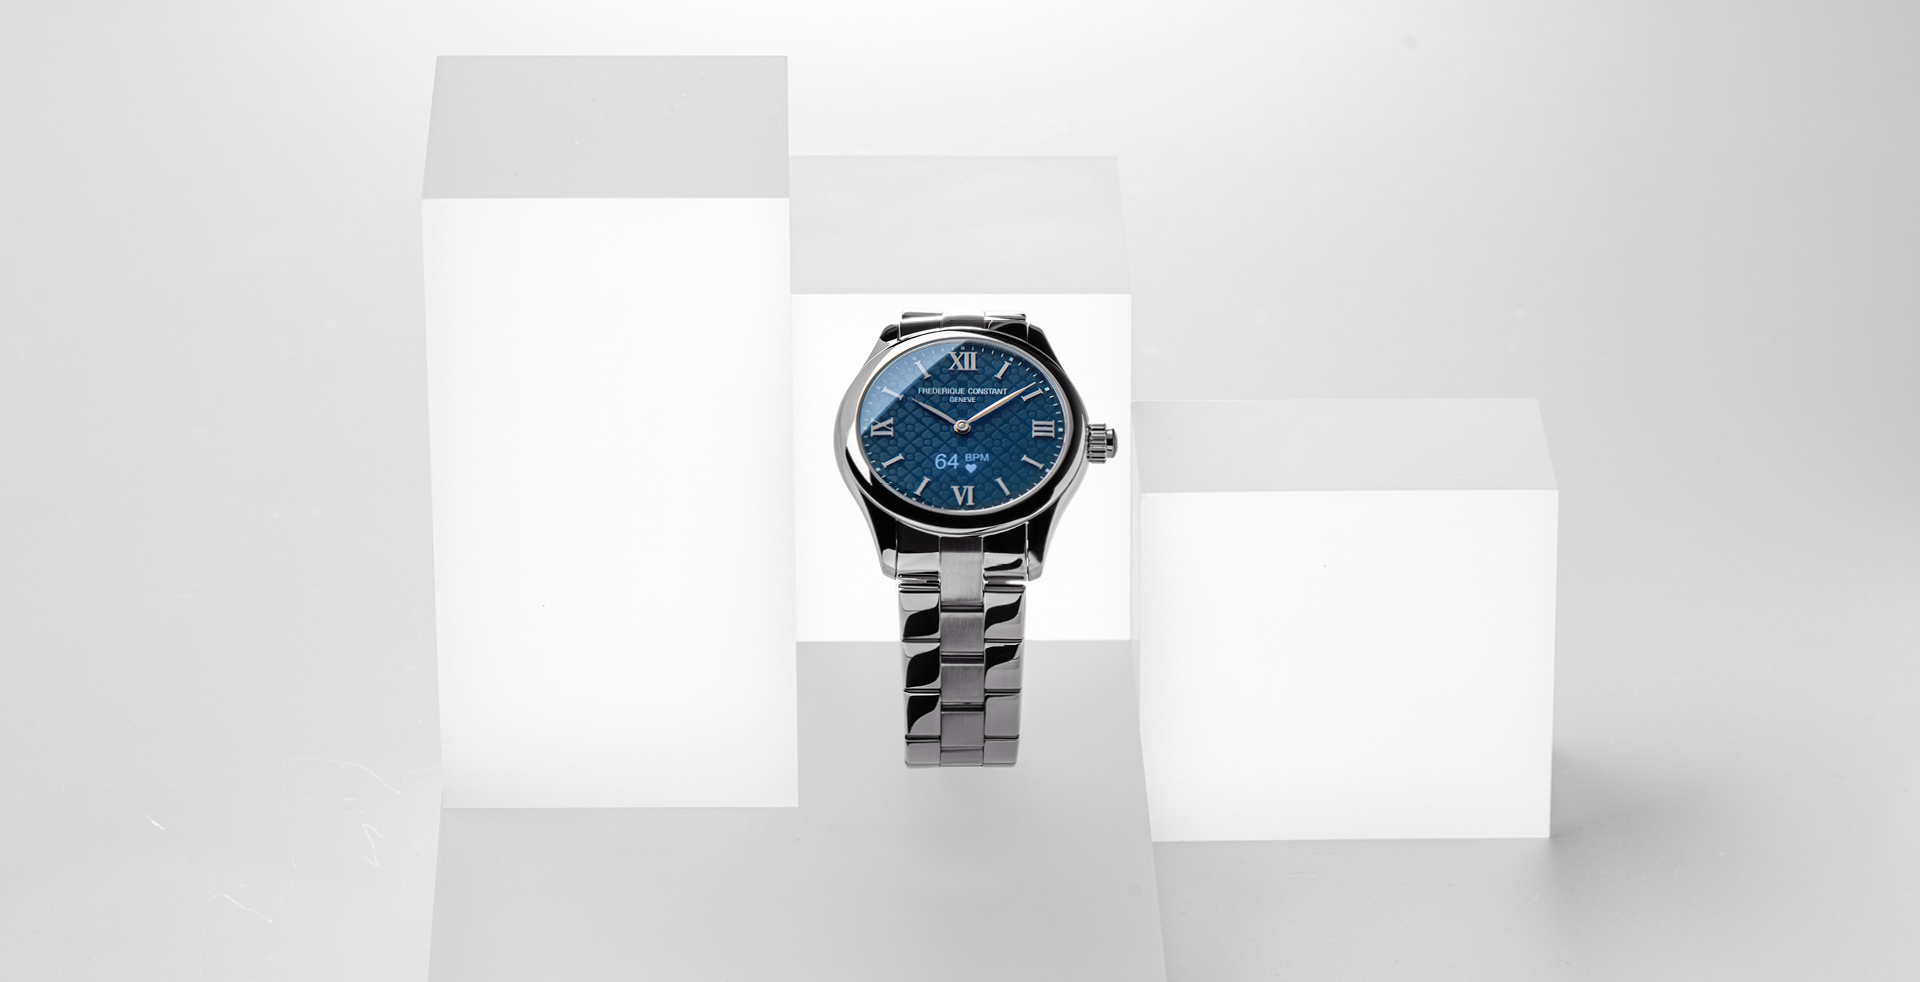 Vitality Ladies Smartwatch for woman. Quartz connected movement, blue dial, stainless-steel case, connected functions, digital screen, rechargeable battery and stainless-steel bracelet 